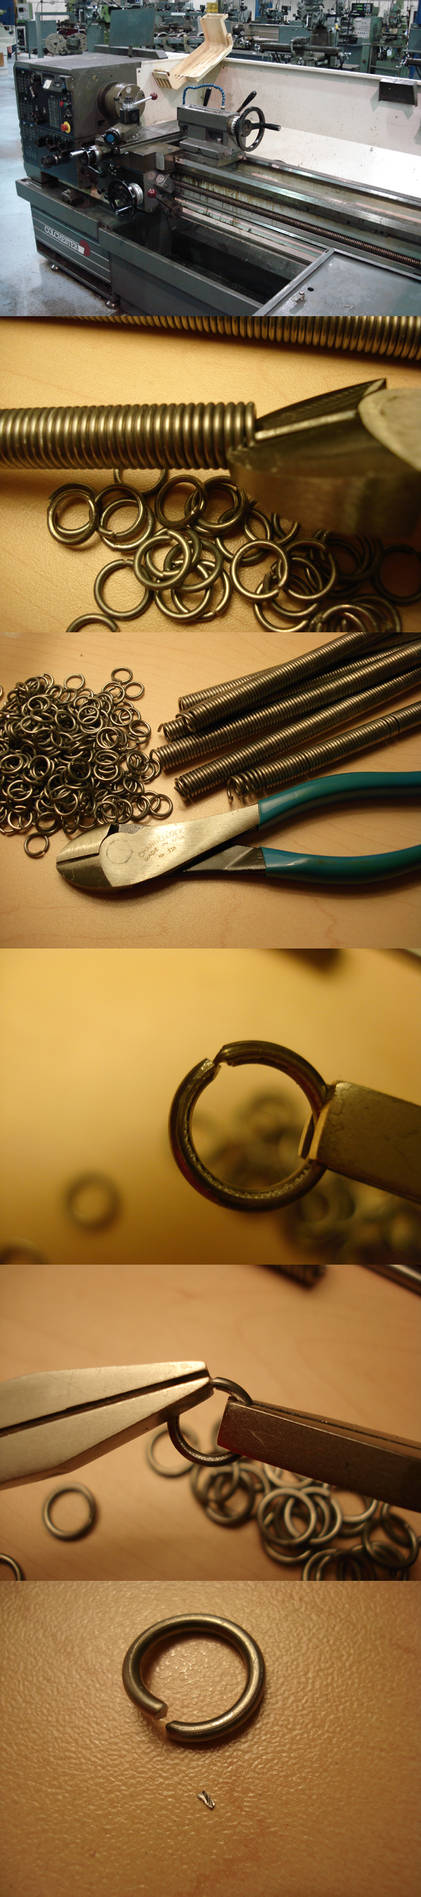 How to Make Chainmail - Part 2 by DaveLuck on DeviantArt